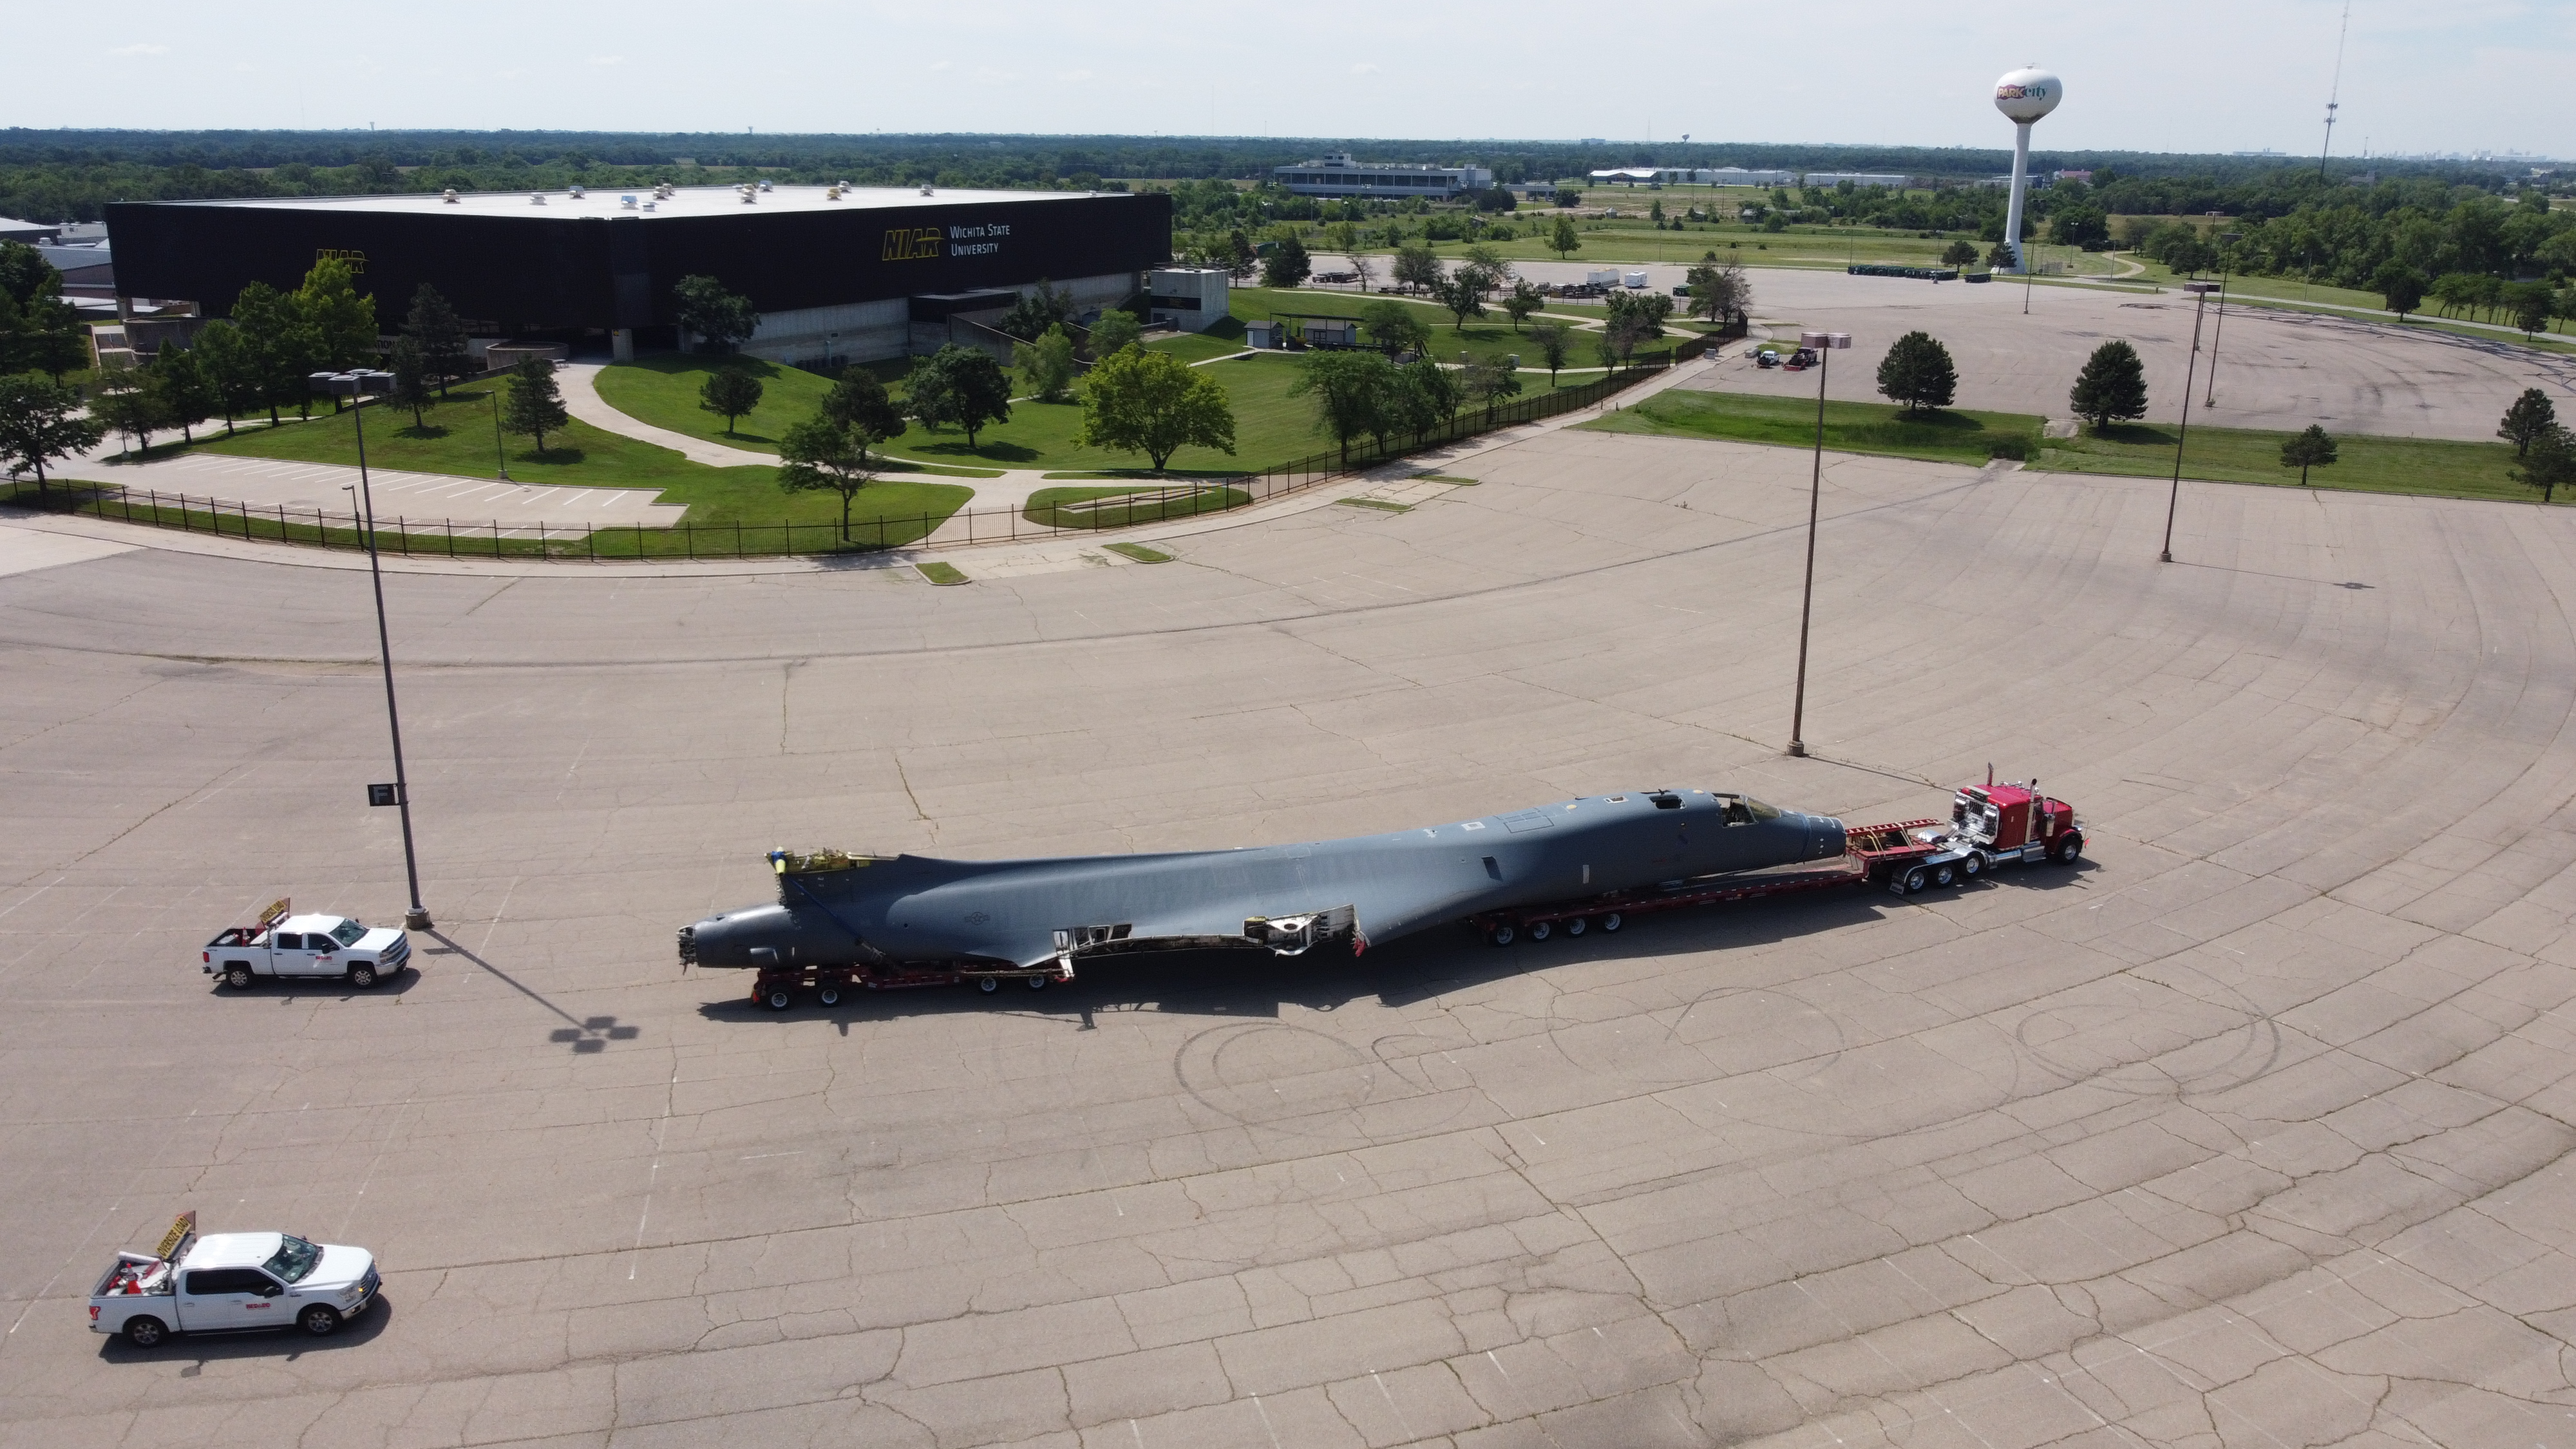 Aeral view of a B-1 aircraft (minus the wings) being towed by a semitruck turning a corner.